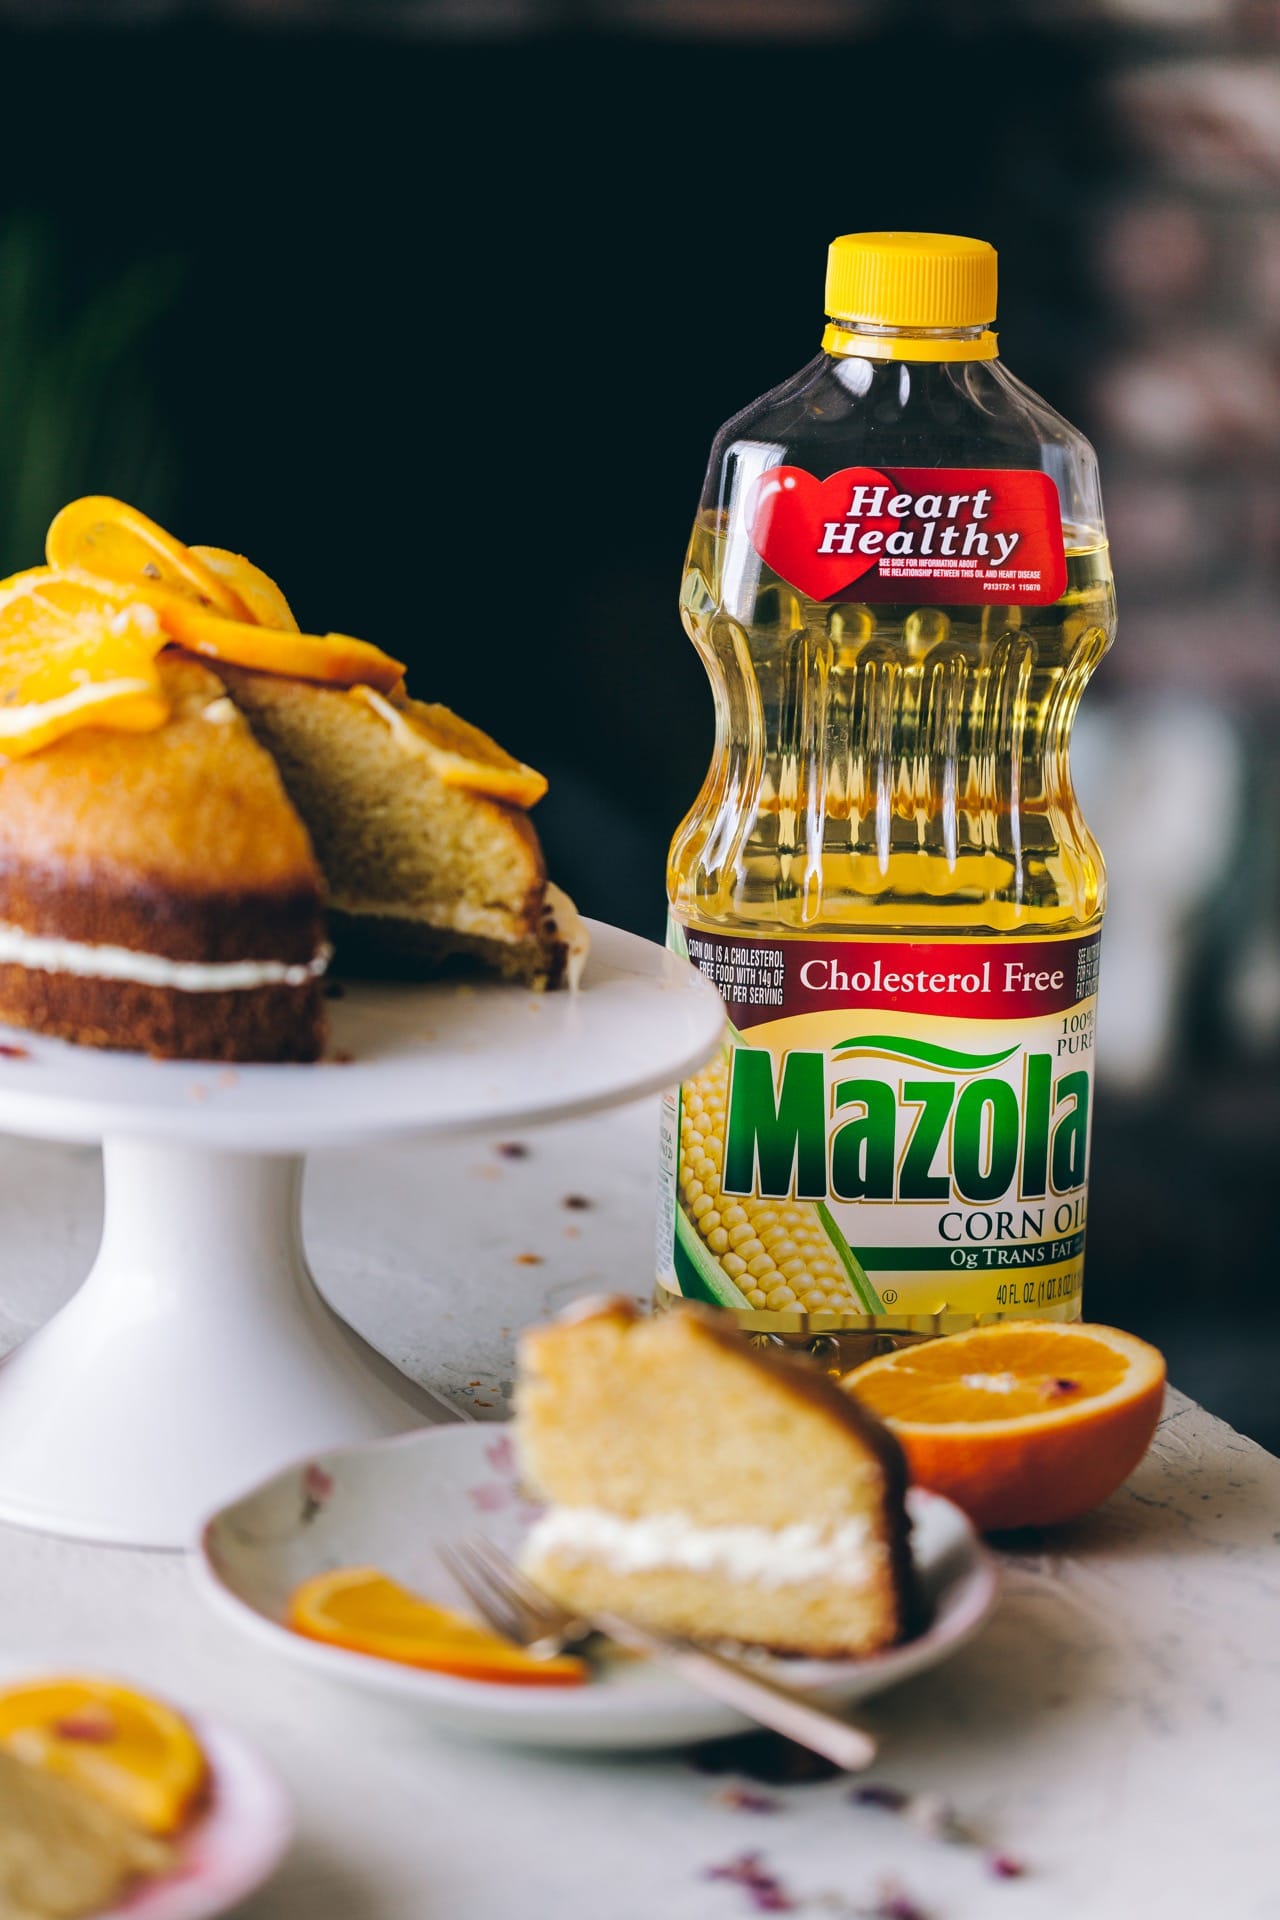 Mazola corn oil | Playful Cooking #cake #orangecake #cornmealcake #foodphotography This shop has been compensated by Collective Bias, Inc. and its advertiser. All opinions are mine alone. #MazolaHeartHealth #CollectiveBias